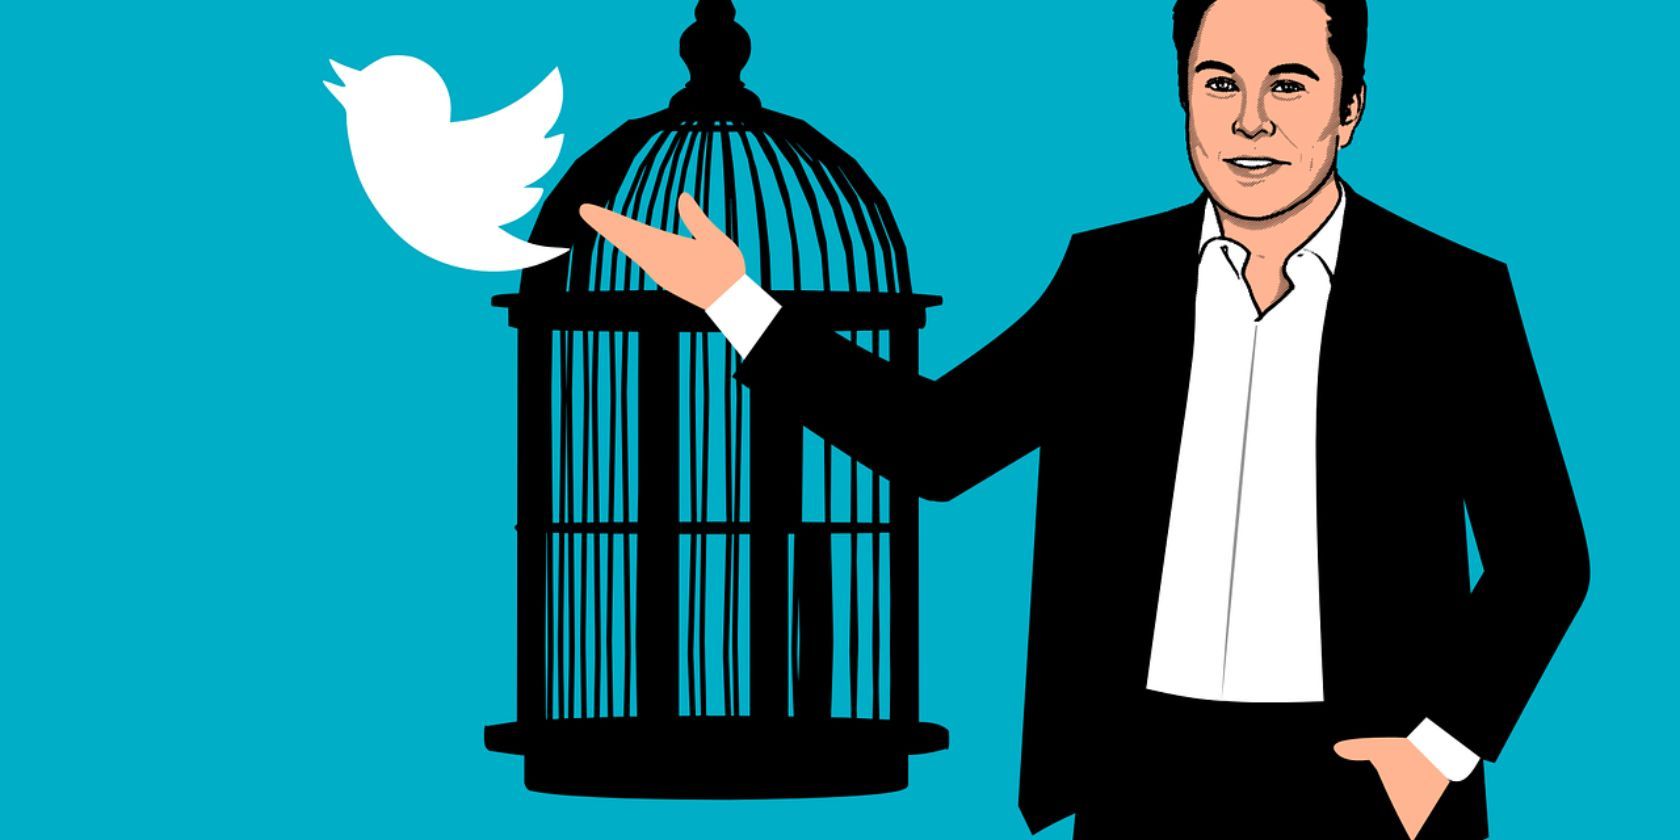 A cartoon vector of Elon Musk with a cage with the Twitter logo inside